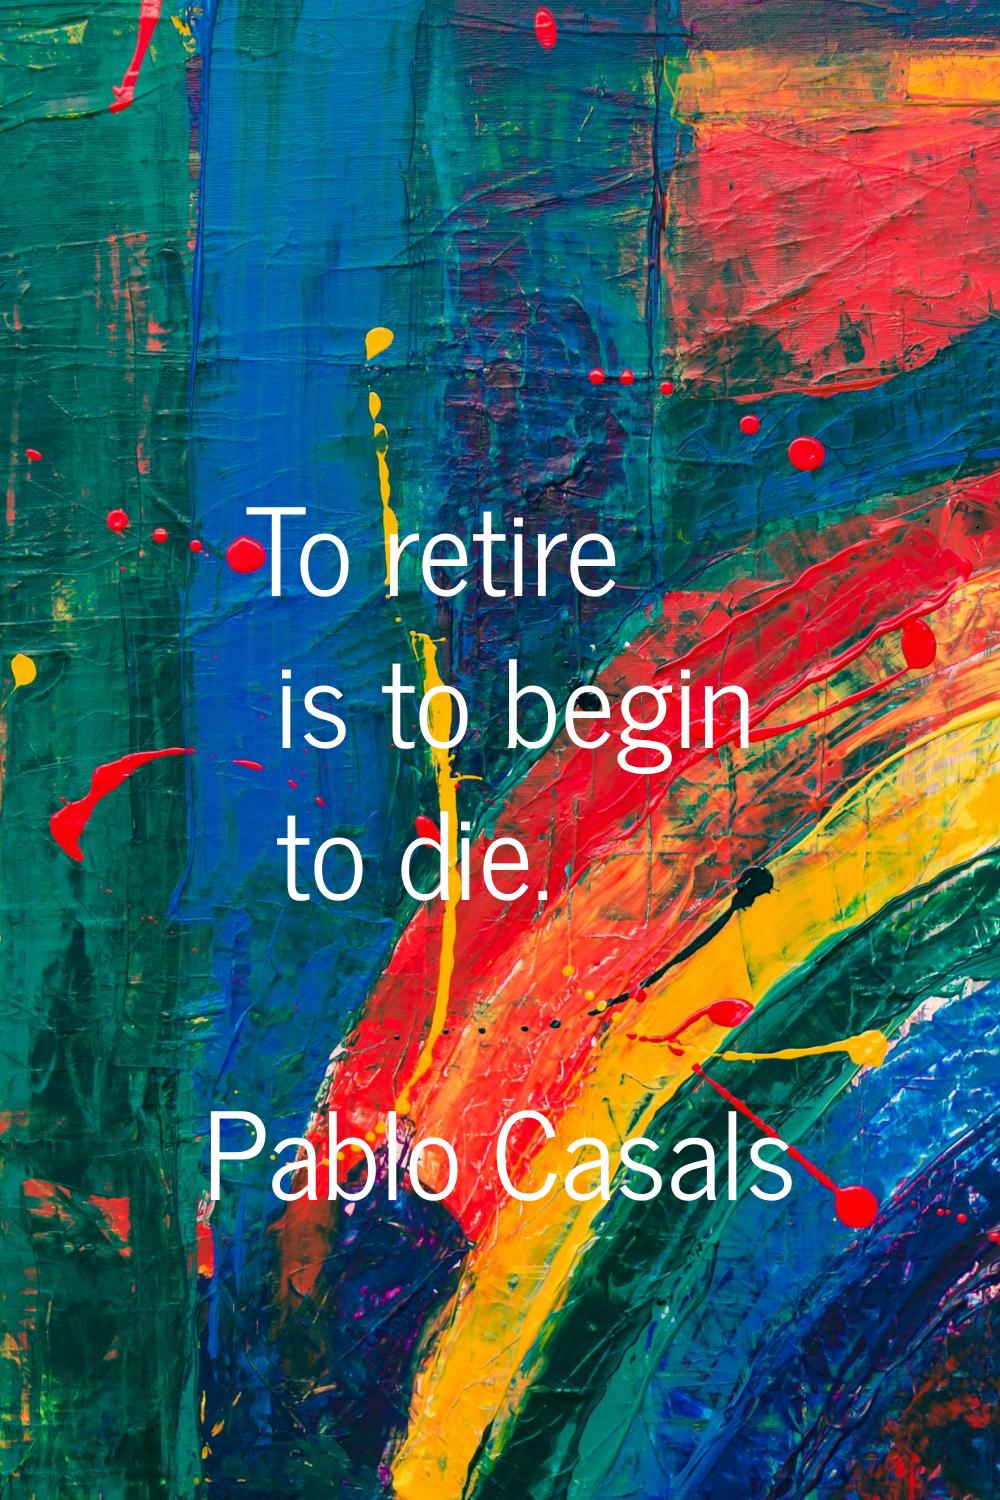 To retire is to begin to die.